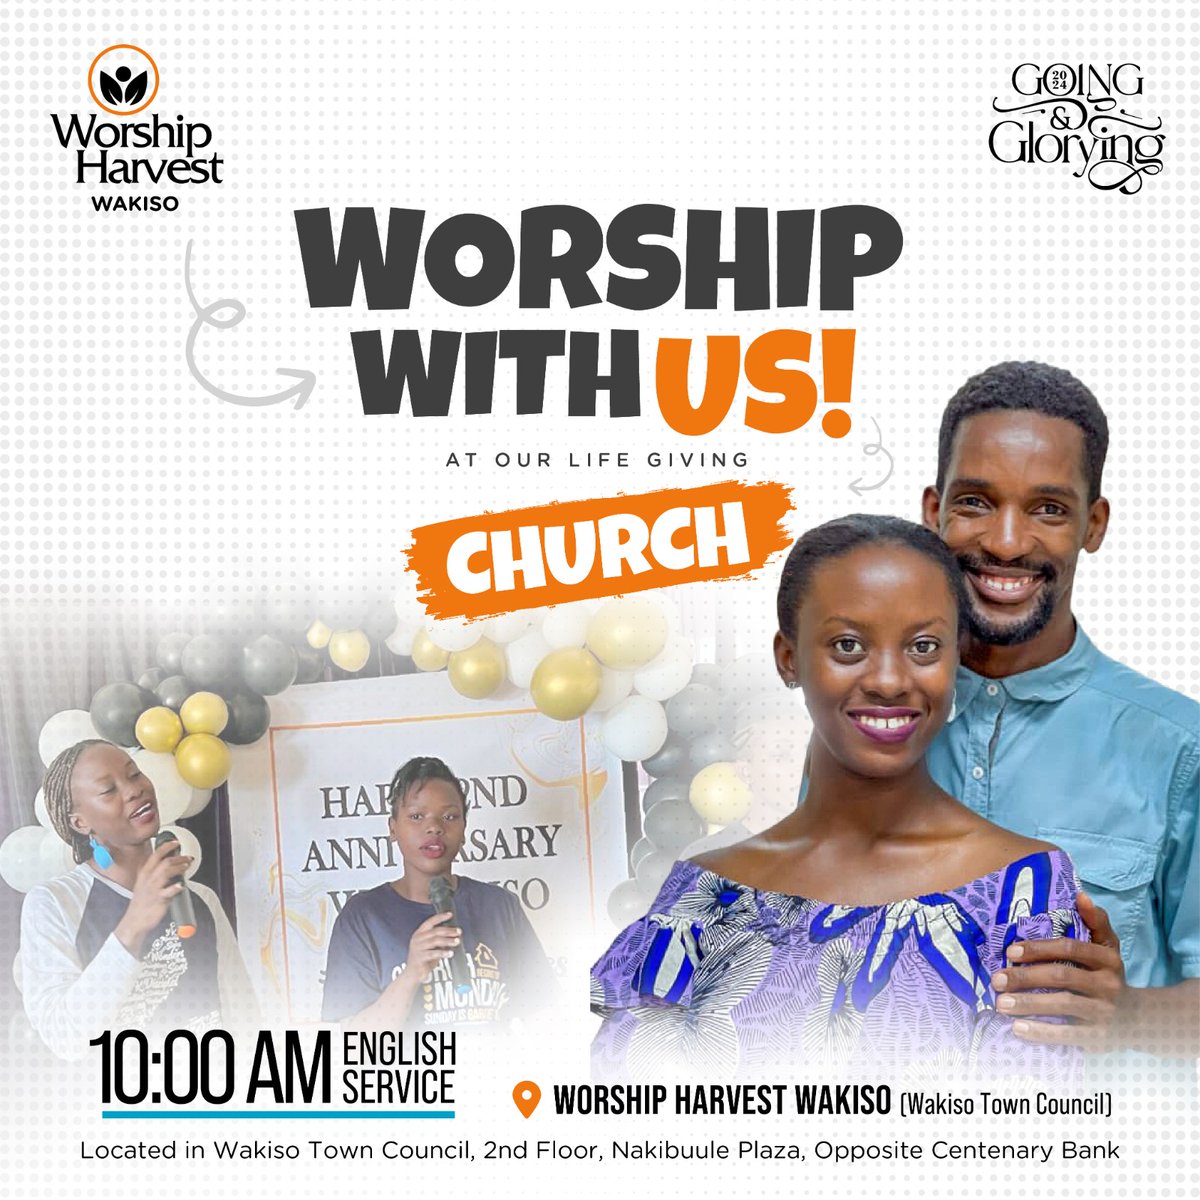 You're welcome to join us this Sunday for a life-giving service as we take time off and thank God for all the good things He has rendered us throughout the week. 😁

#WorshipHarvestWakiso #GoingAndGlorying #SundayMorning #Trending